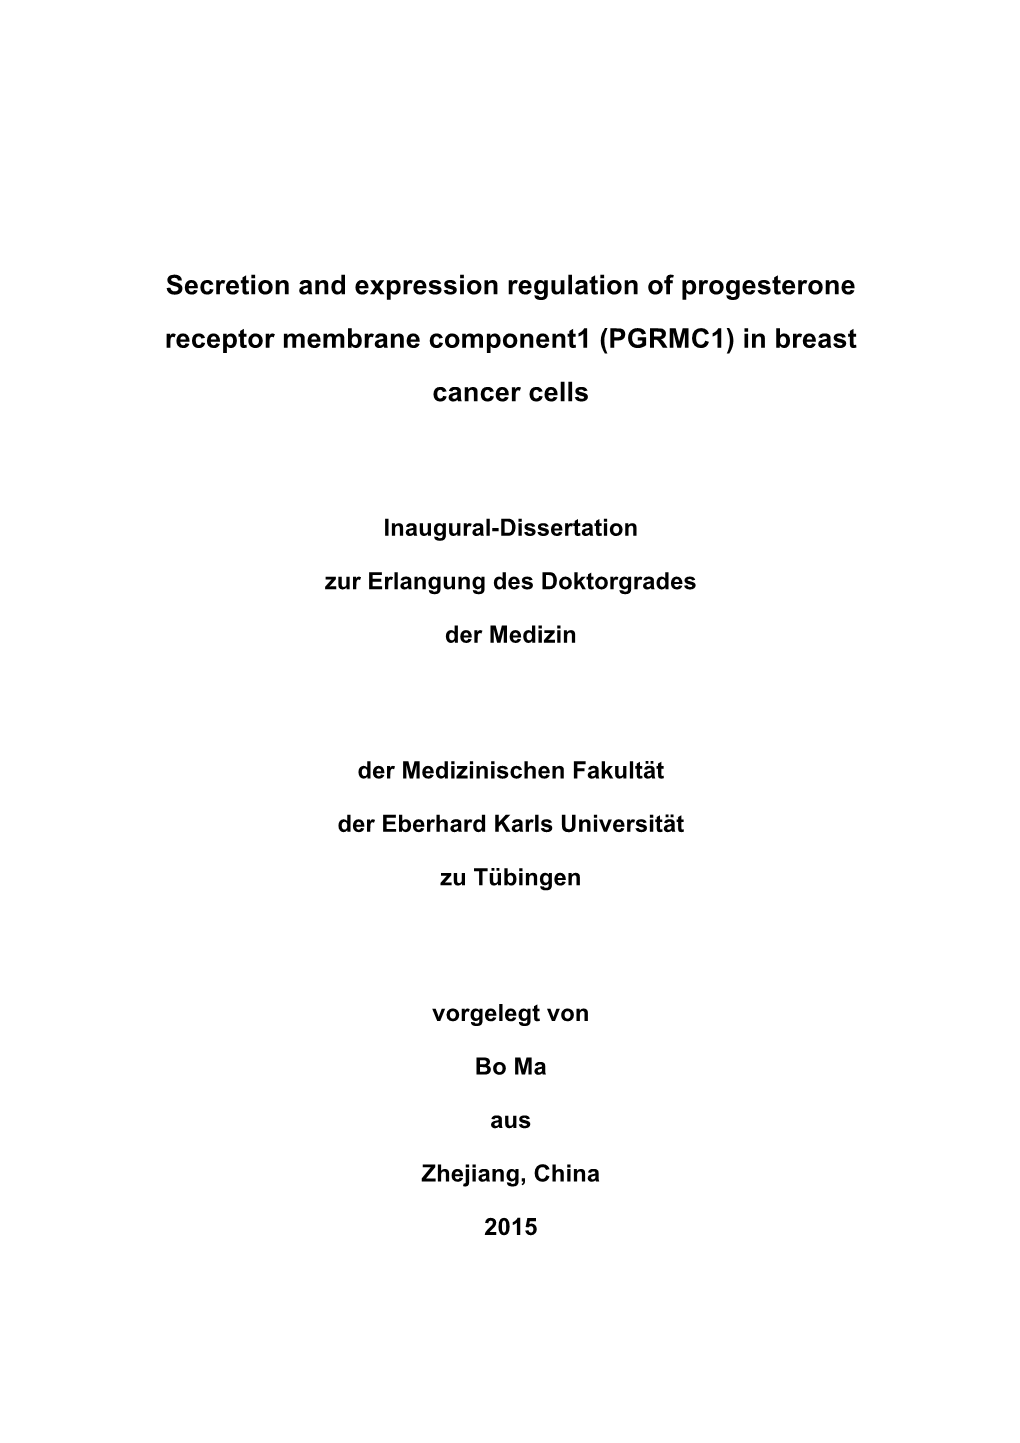 Secretion and Expression Regulation of Progesterone Receptor Membrane Component1 (PGRMC1) in Breast Cancer Cells